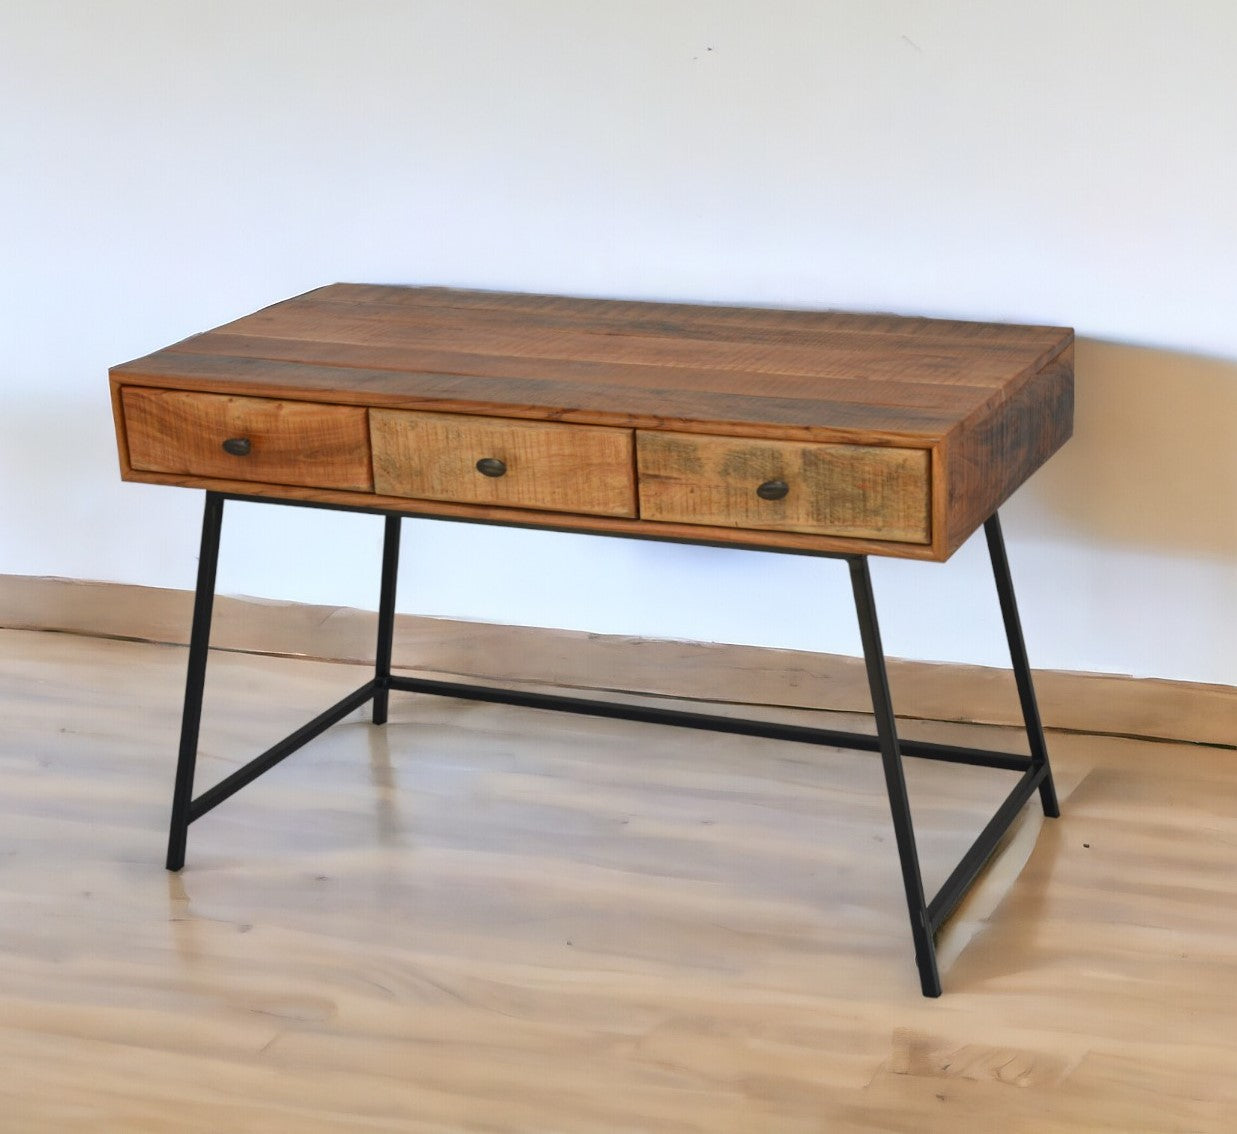 47" Natural And Black Mango Solid Wood Writing Desk With Three Drawers